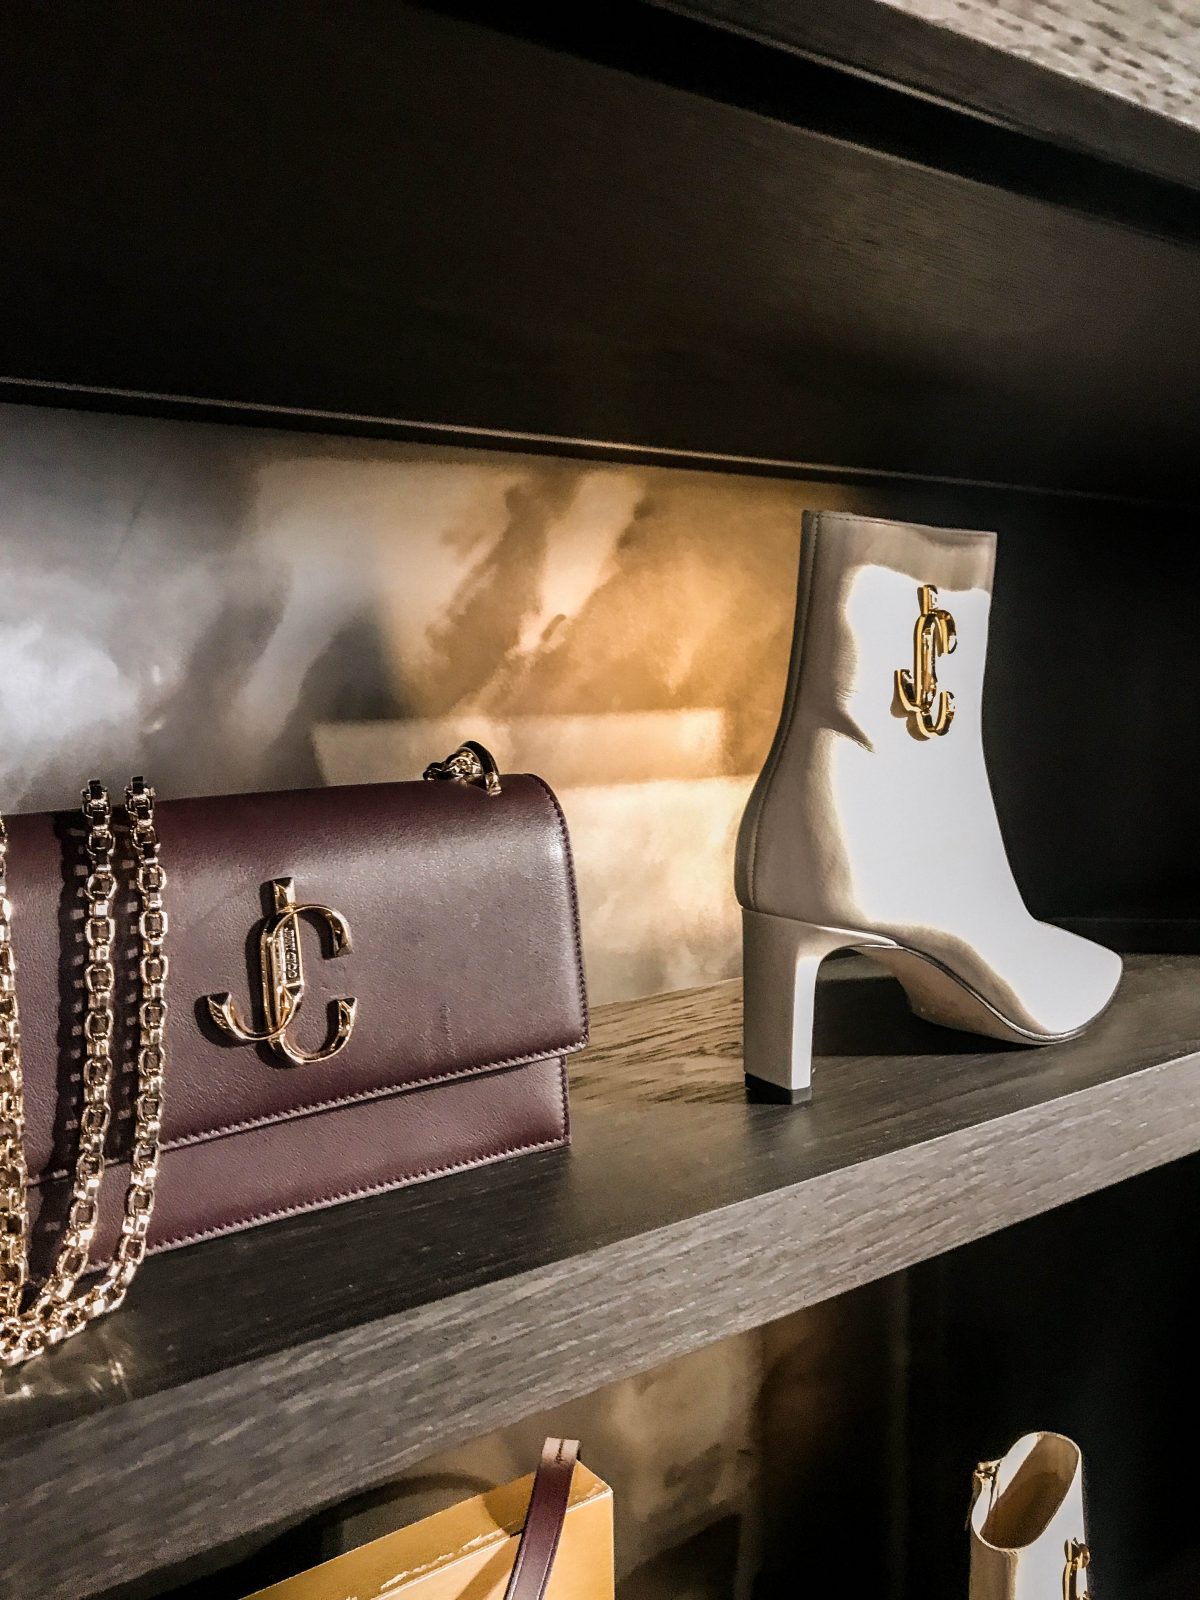 Parent Company of Jimmy Choo and Michael Kors Tops Earnings Expectations